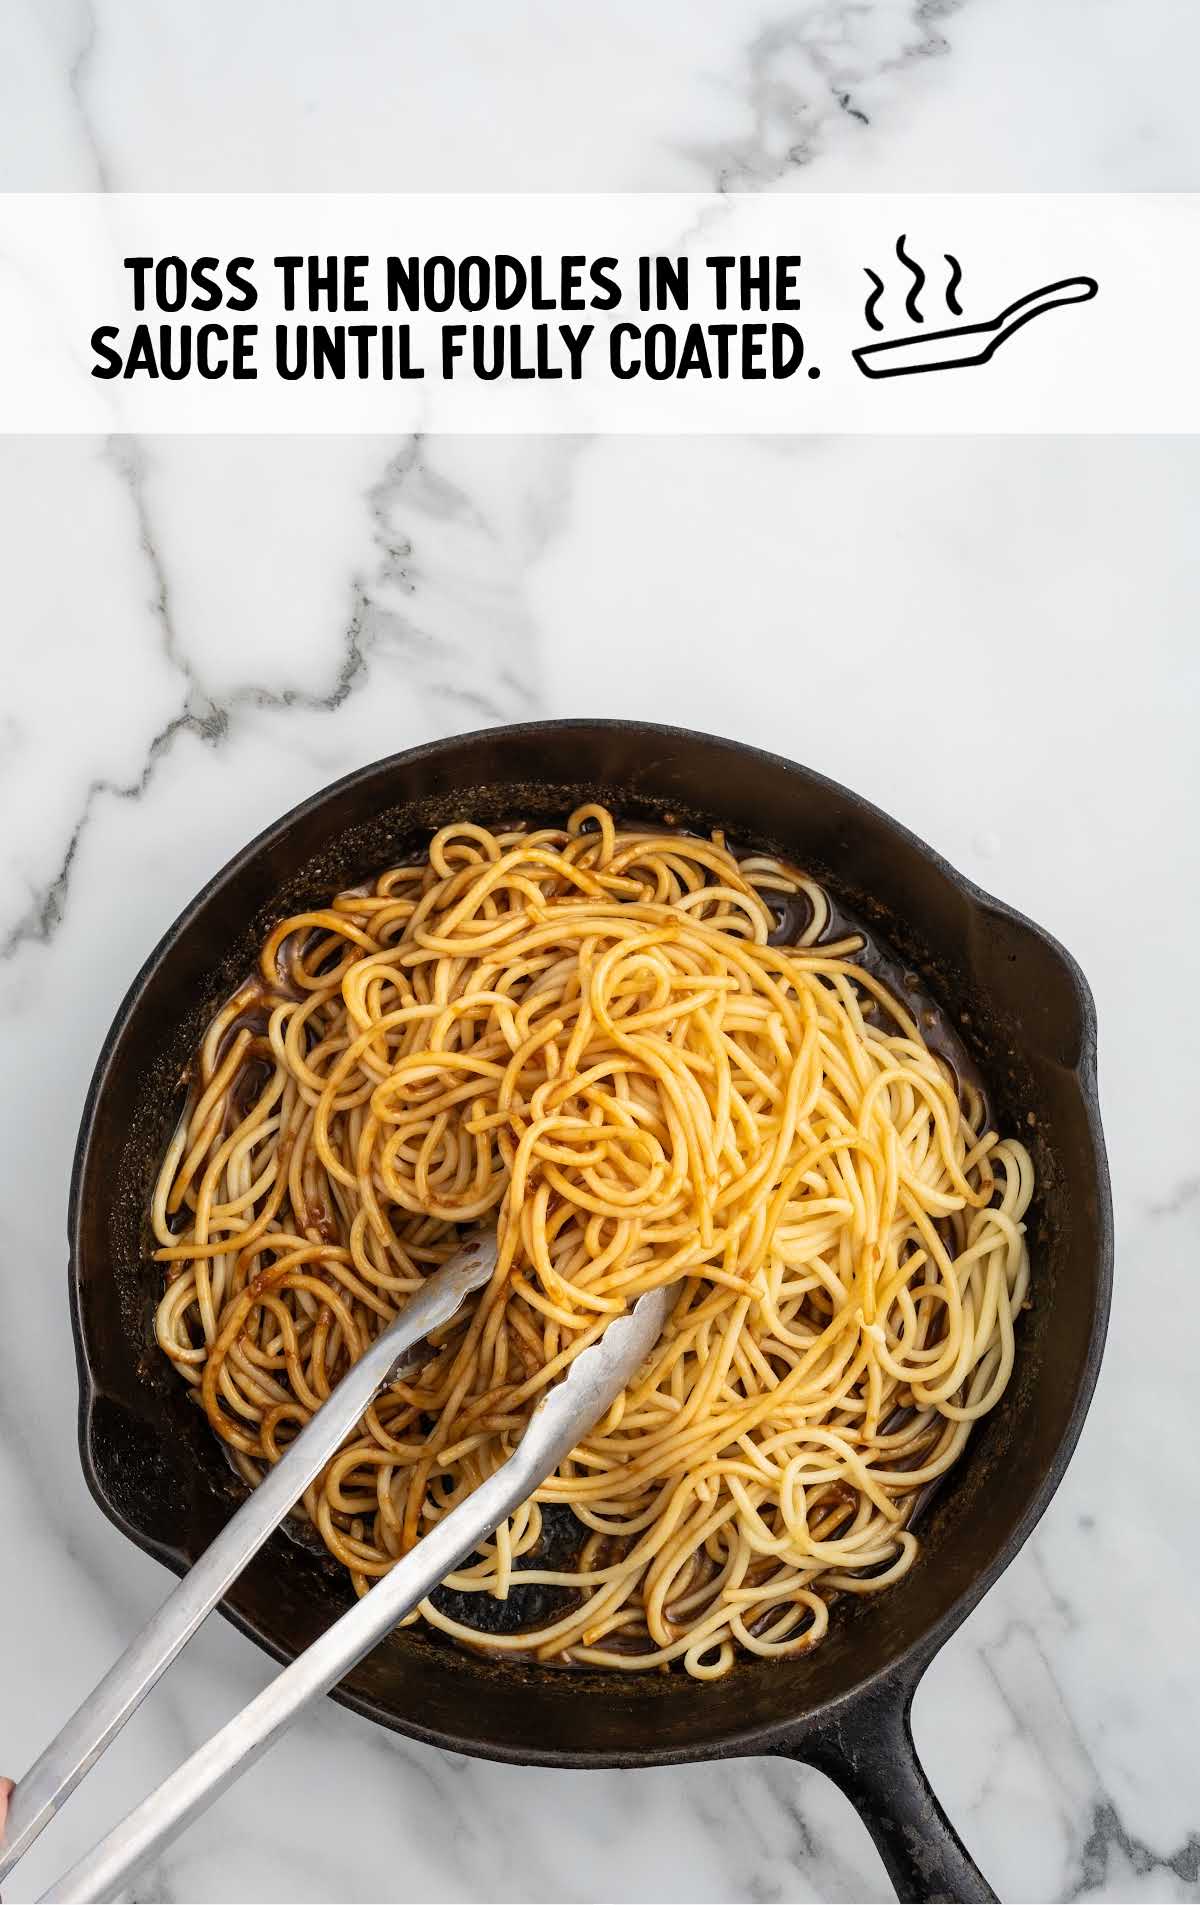 noodles tossed in the sauce until fully coated